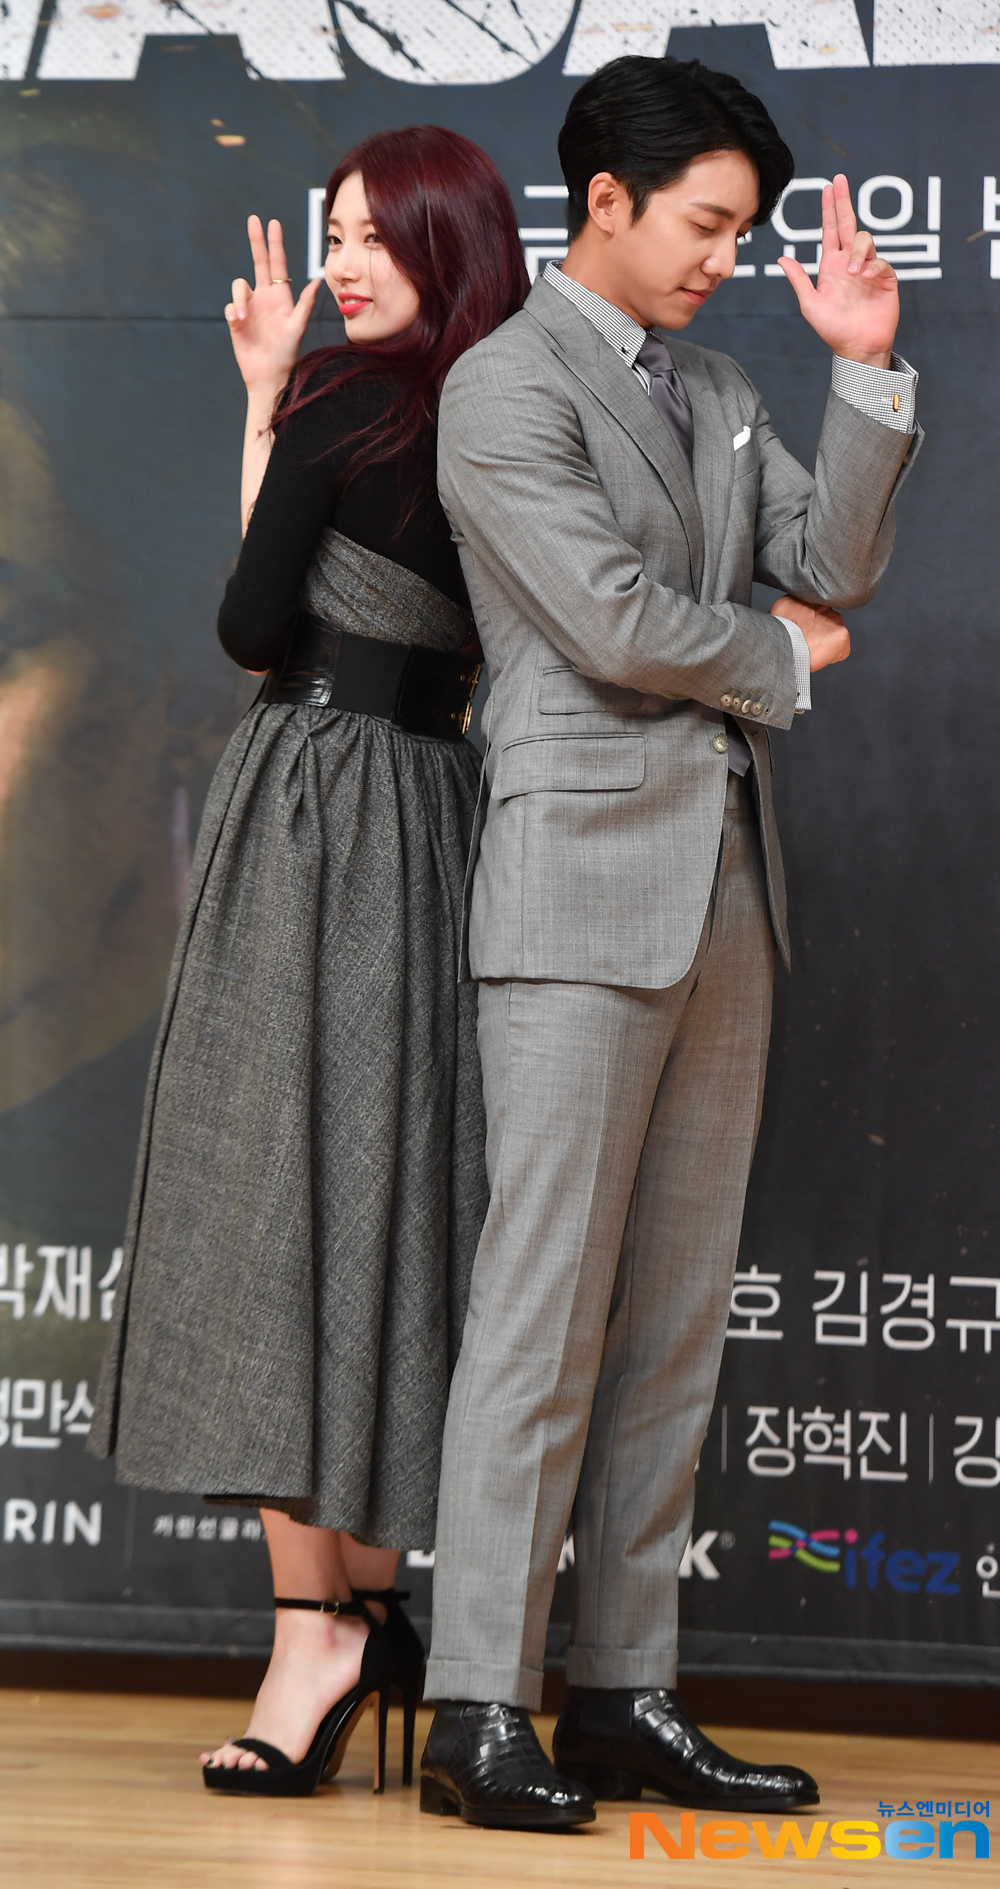 SBSs new gilt drama Vagabond production presentation was held on September 16 at SBS in Mokdong, Yangcheon-gu, Seoul City.Bae Suzy.Lee Seung-gi is responding to the photo pose on the day.Actor Lee Seung-gi, Bae Suzy, Shin Sung-rok, Moon Jung-hee and Hwang Bo-ra attended the production presentation.expressiveness